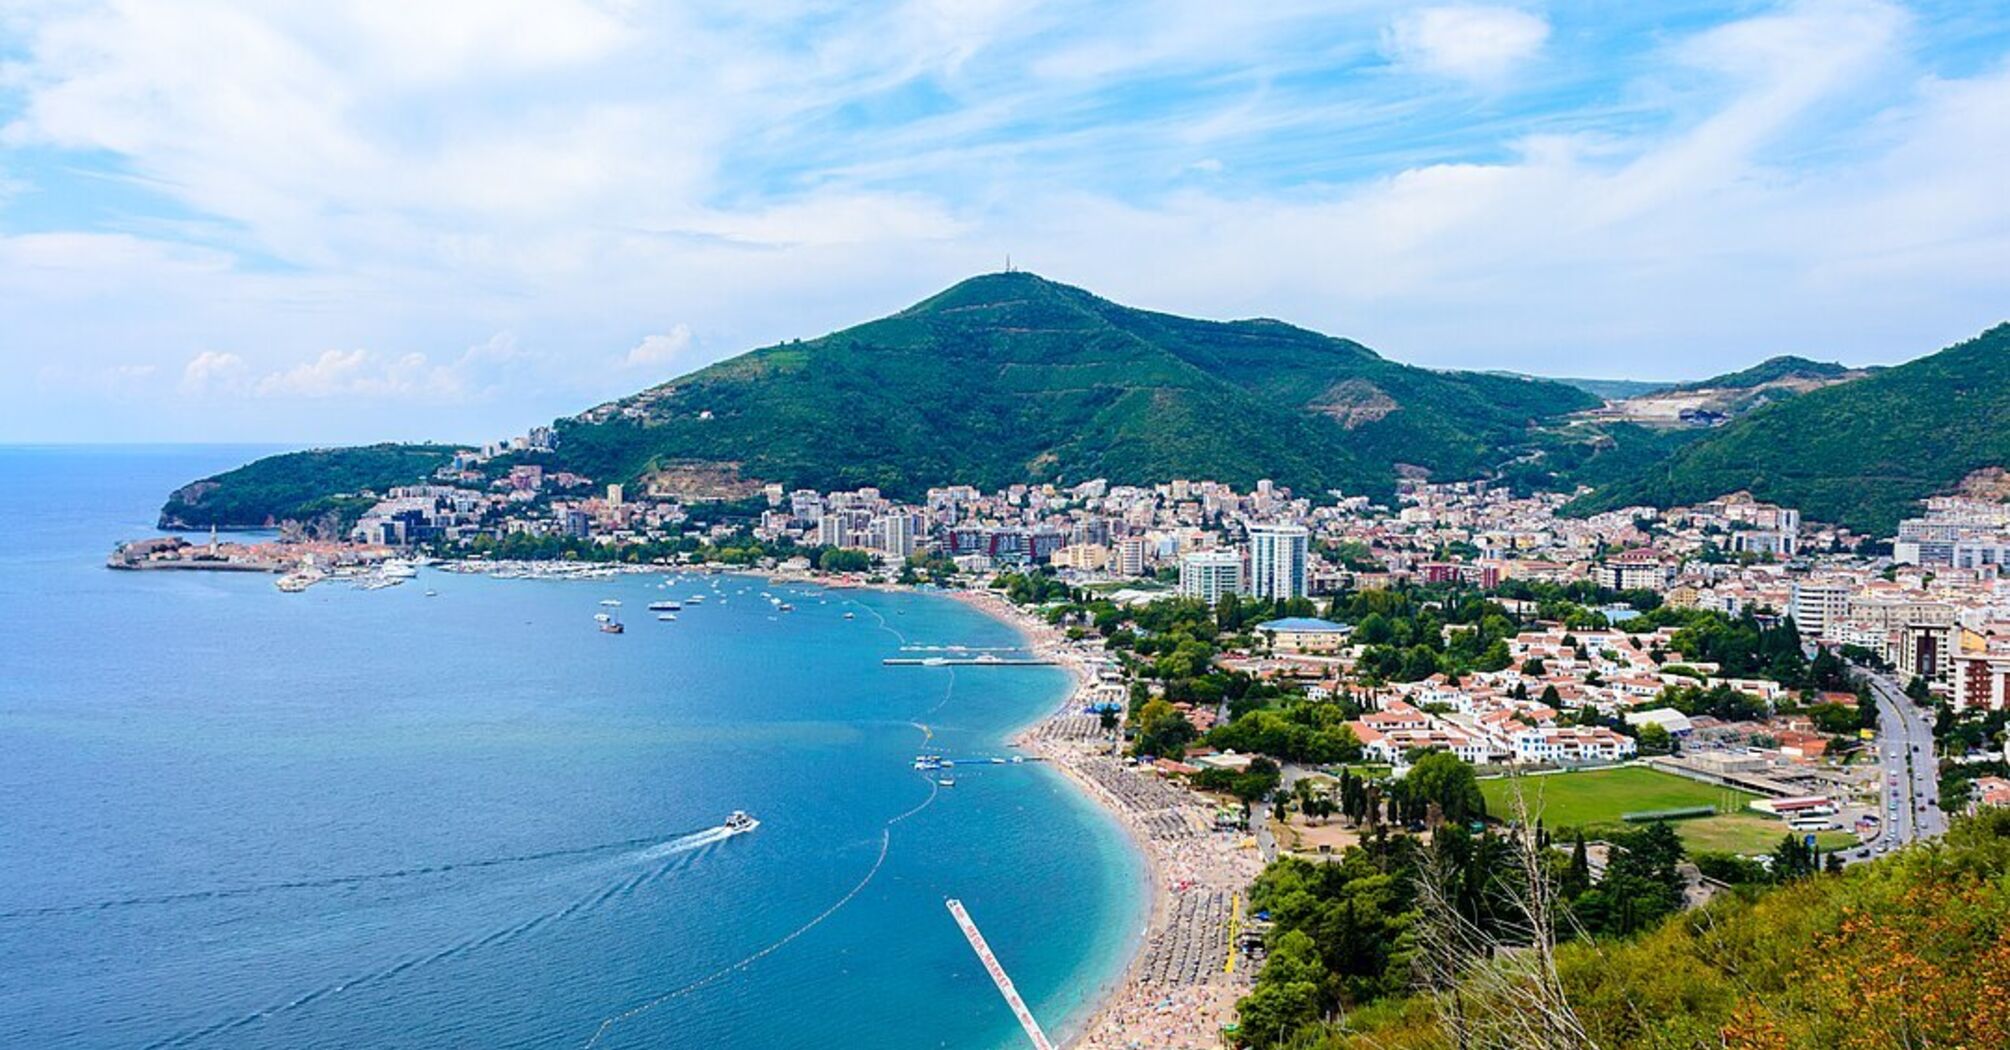 Travel guide to Budva, Montenegro: Tips and what to see and do in the city and its surroundings